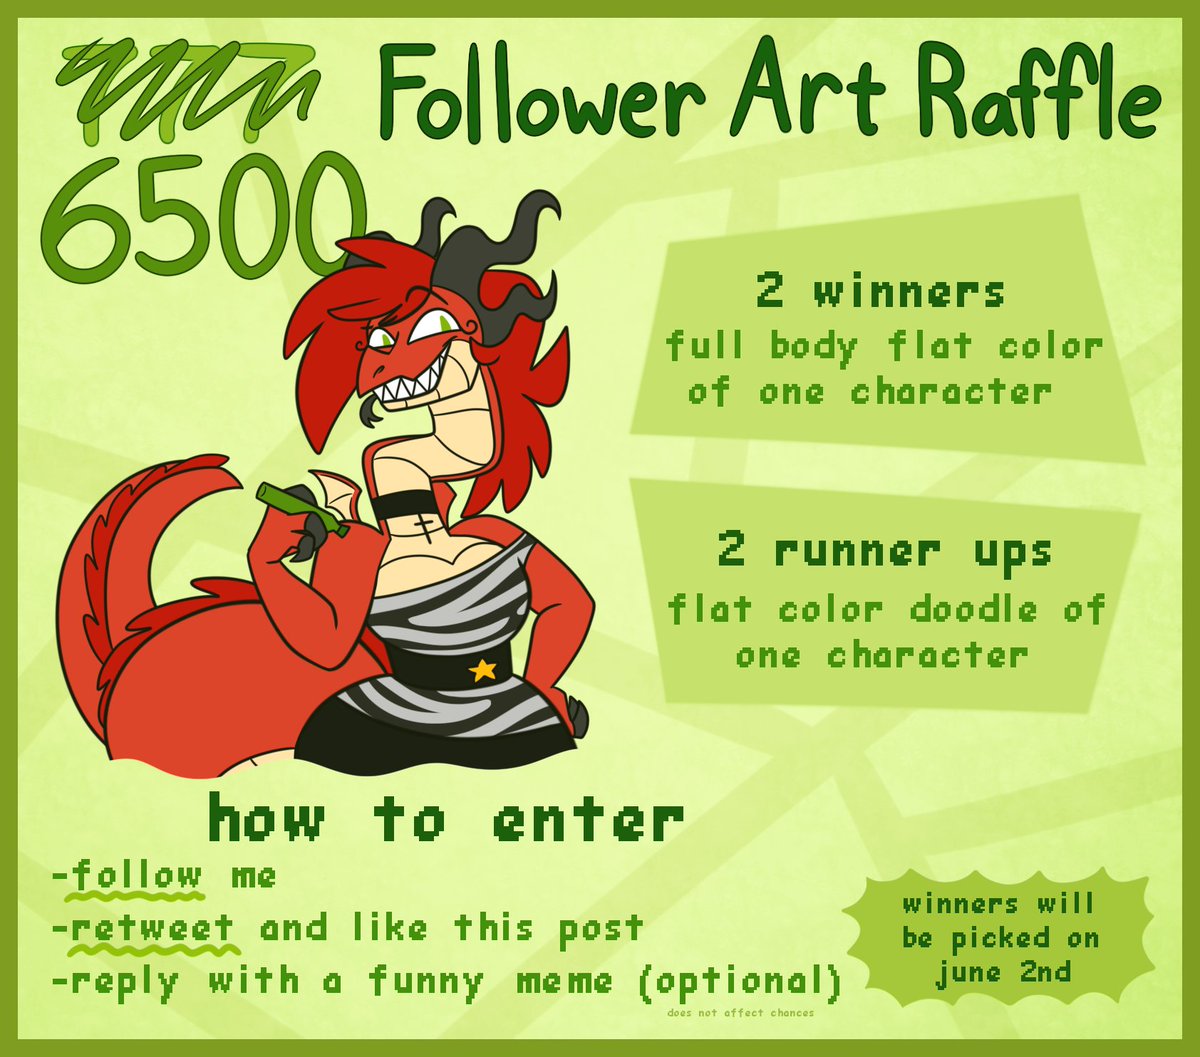 finally, my 7̴7̴7̴ ... 6500 Follower Art Raffle. 2 winners 2 runner ups to enter ⇢ you have to be following me ⇠ ⇢ Retweet and Like this post ⇠ raffle ends on June 2nd